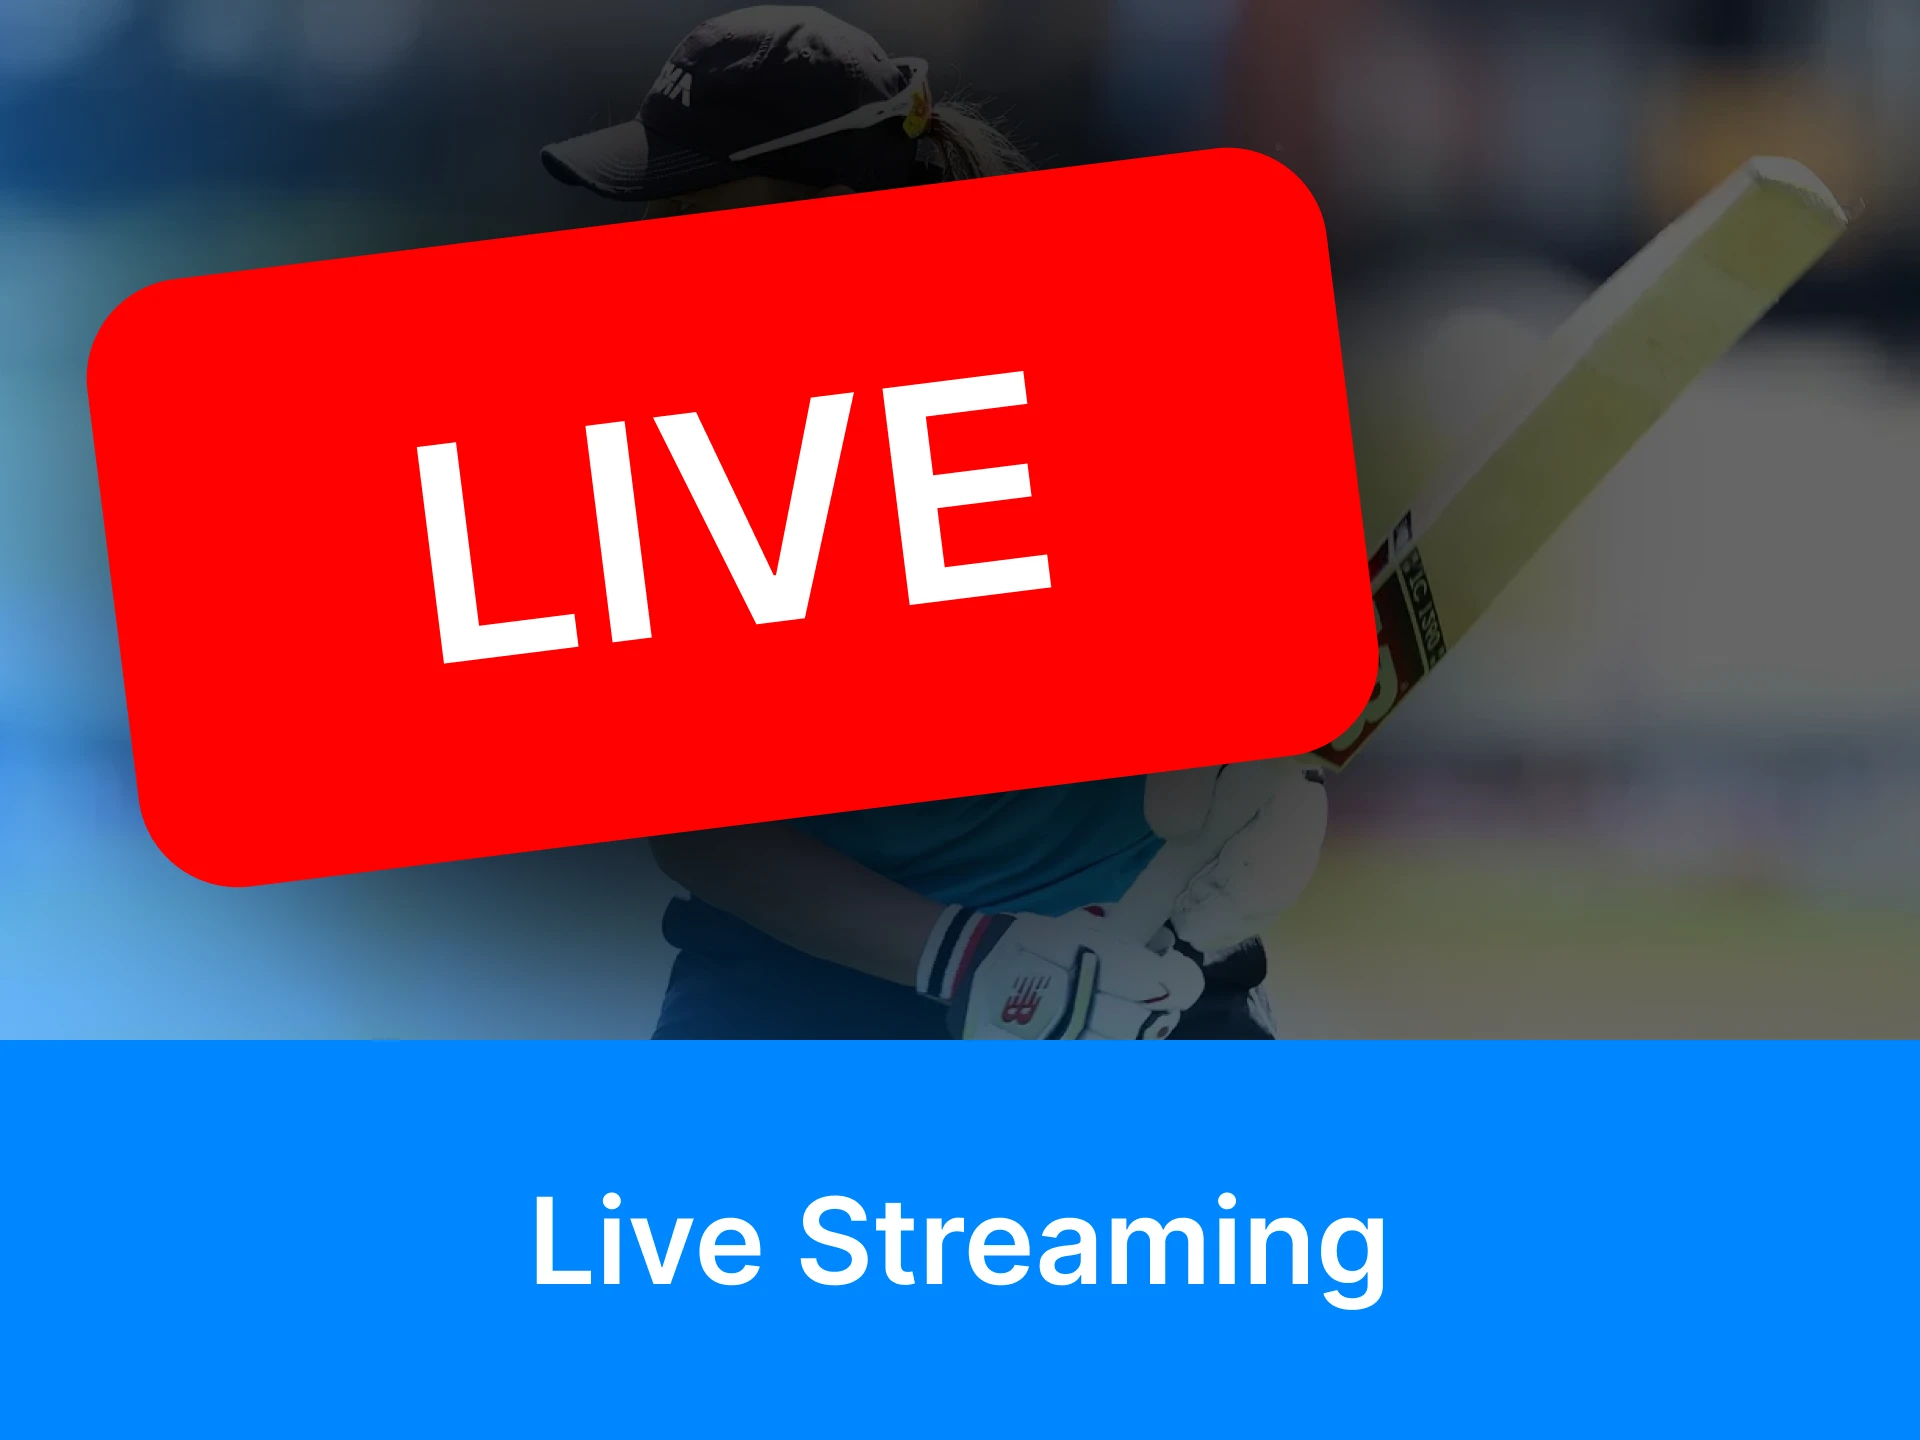 The Women's Ashes series can be followed online.